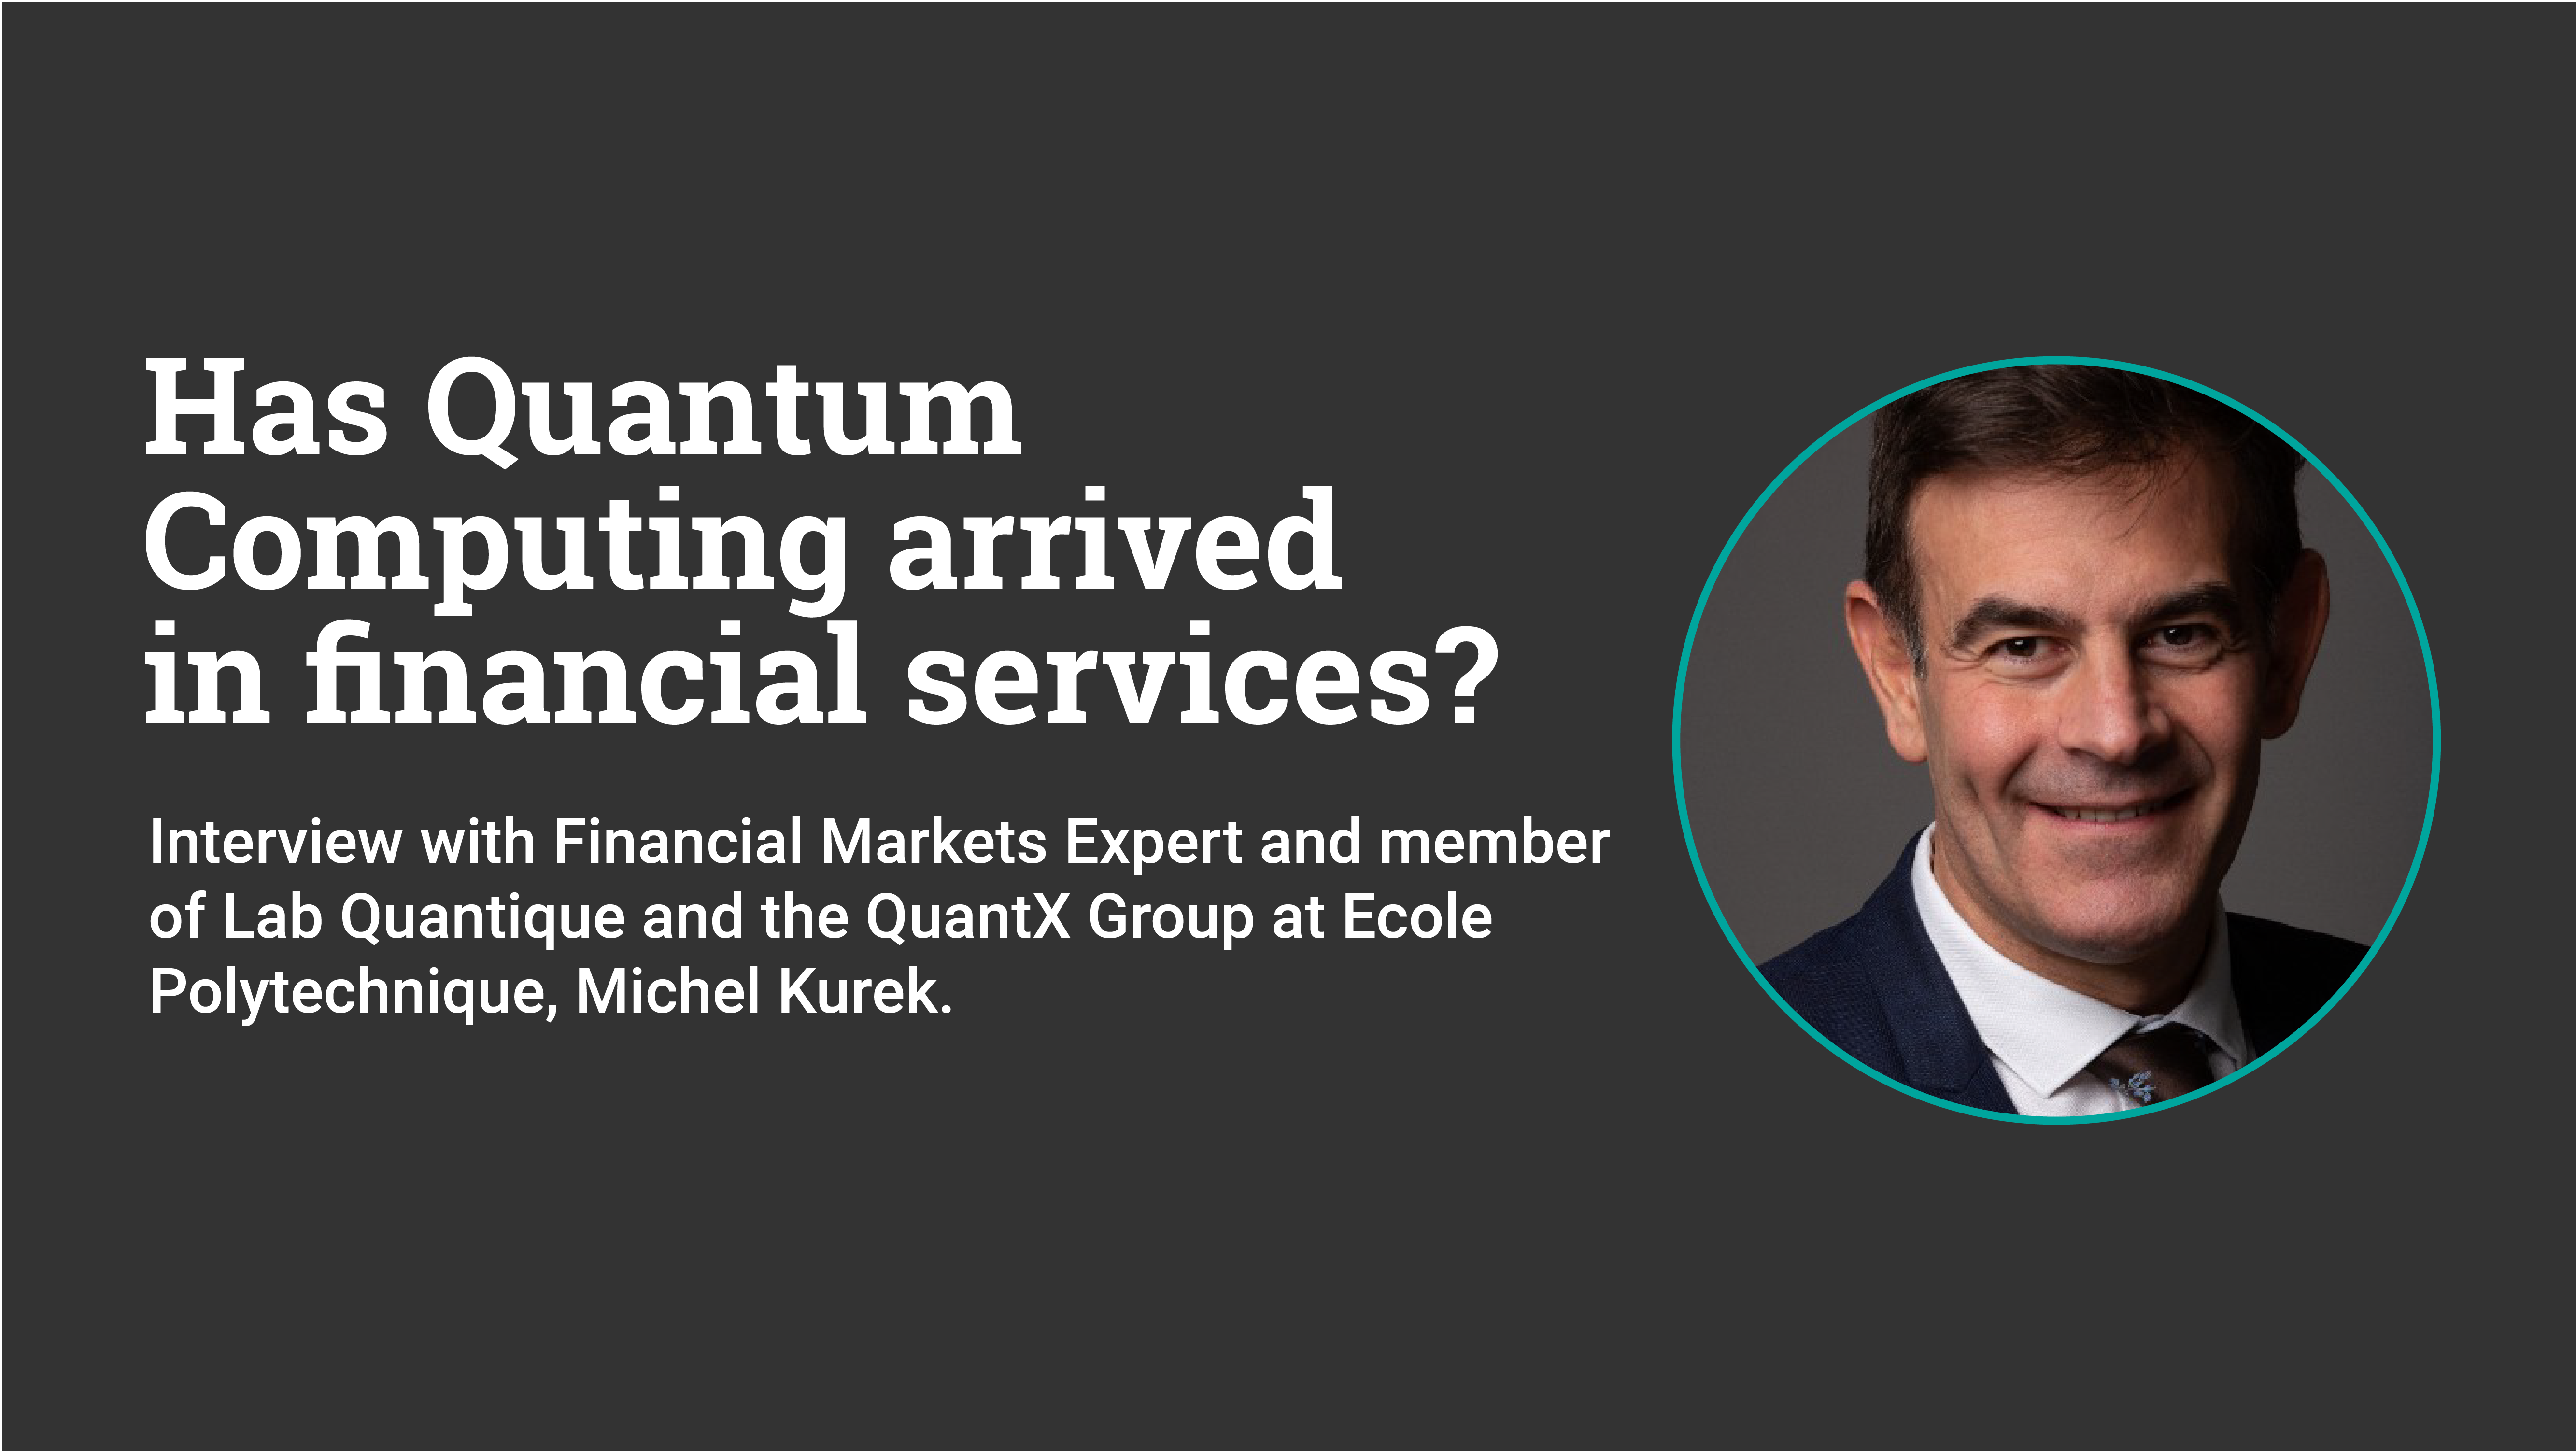 Has quantum computing arrived in financial markets?